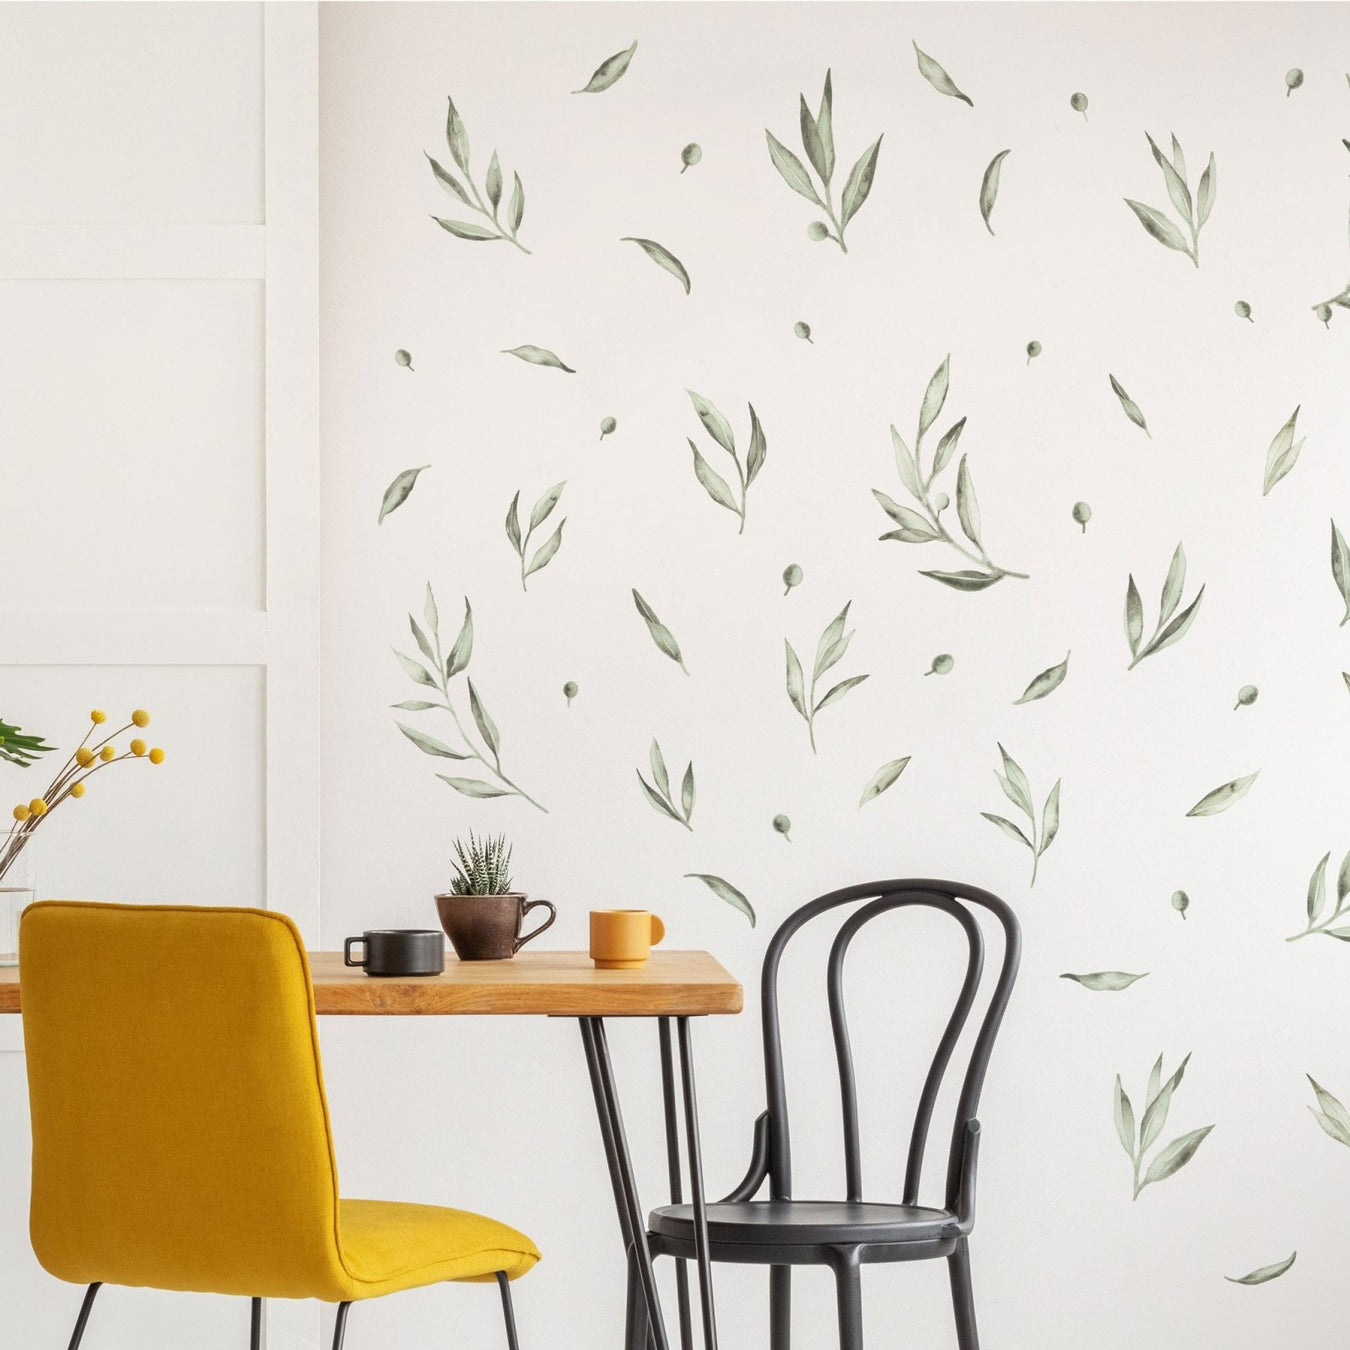 Wall Stickers for Grown-up spaces - Made of Sundays